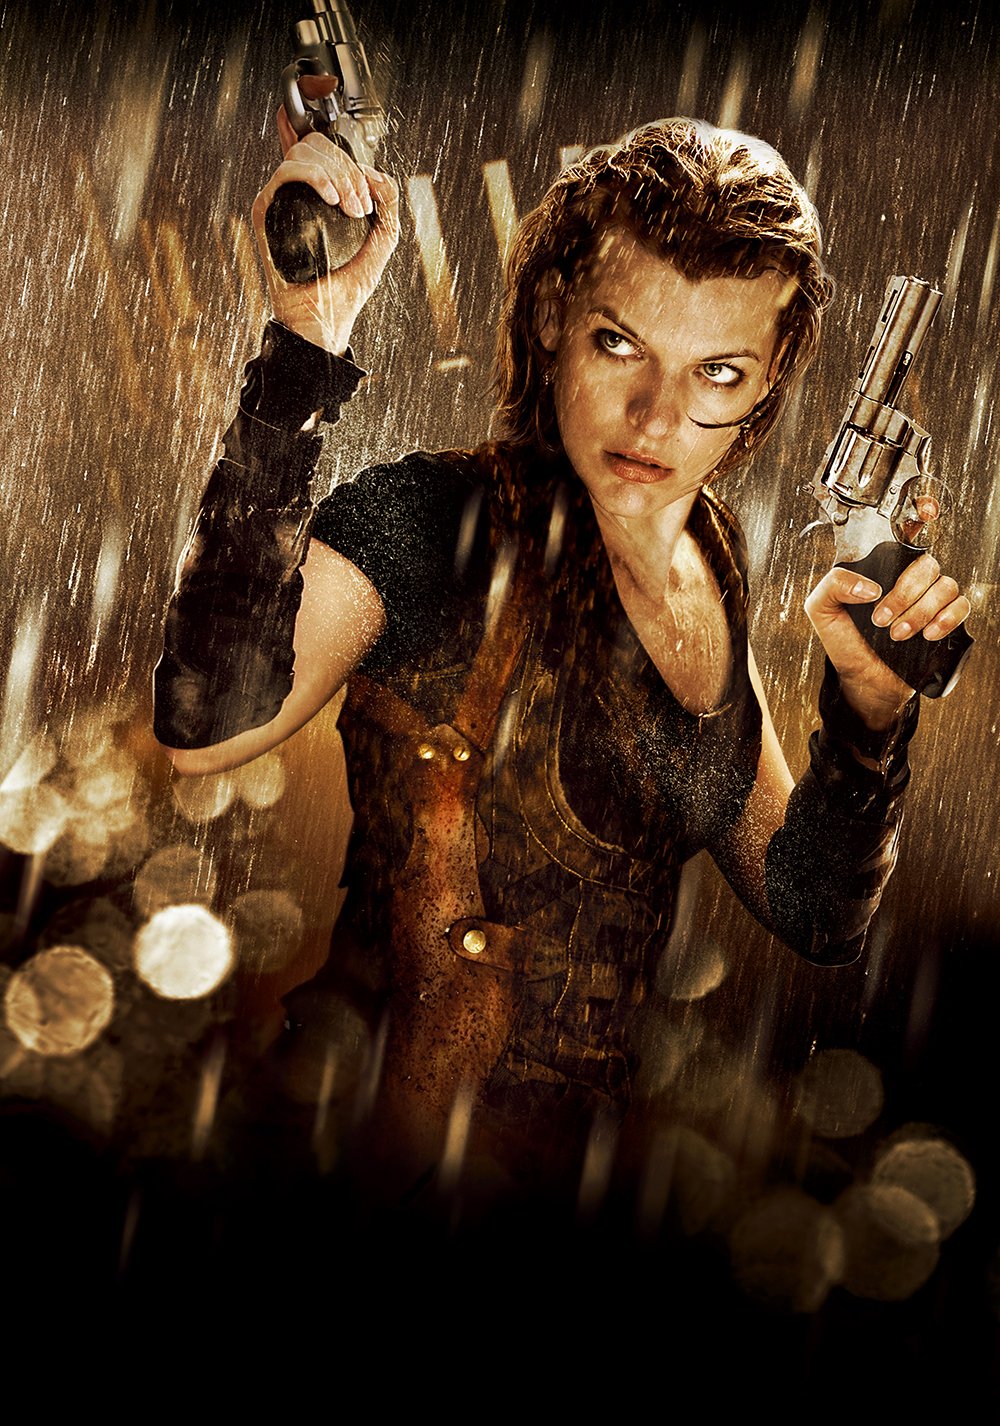 resident evil movies in order by storyline